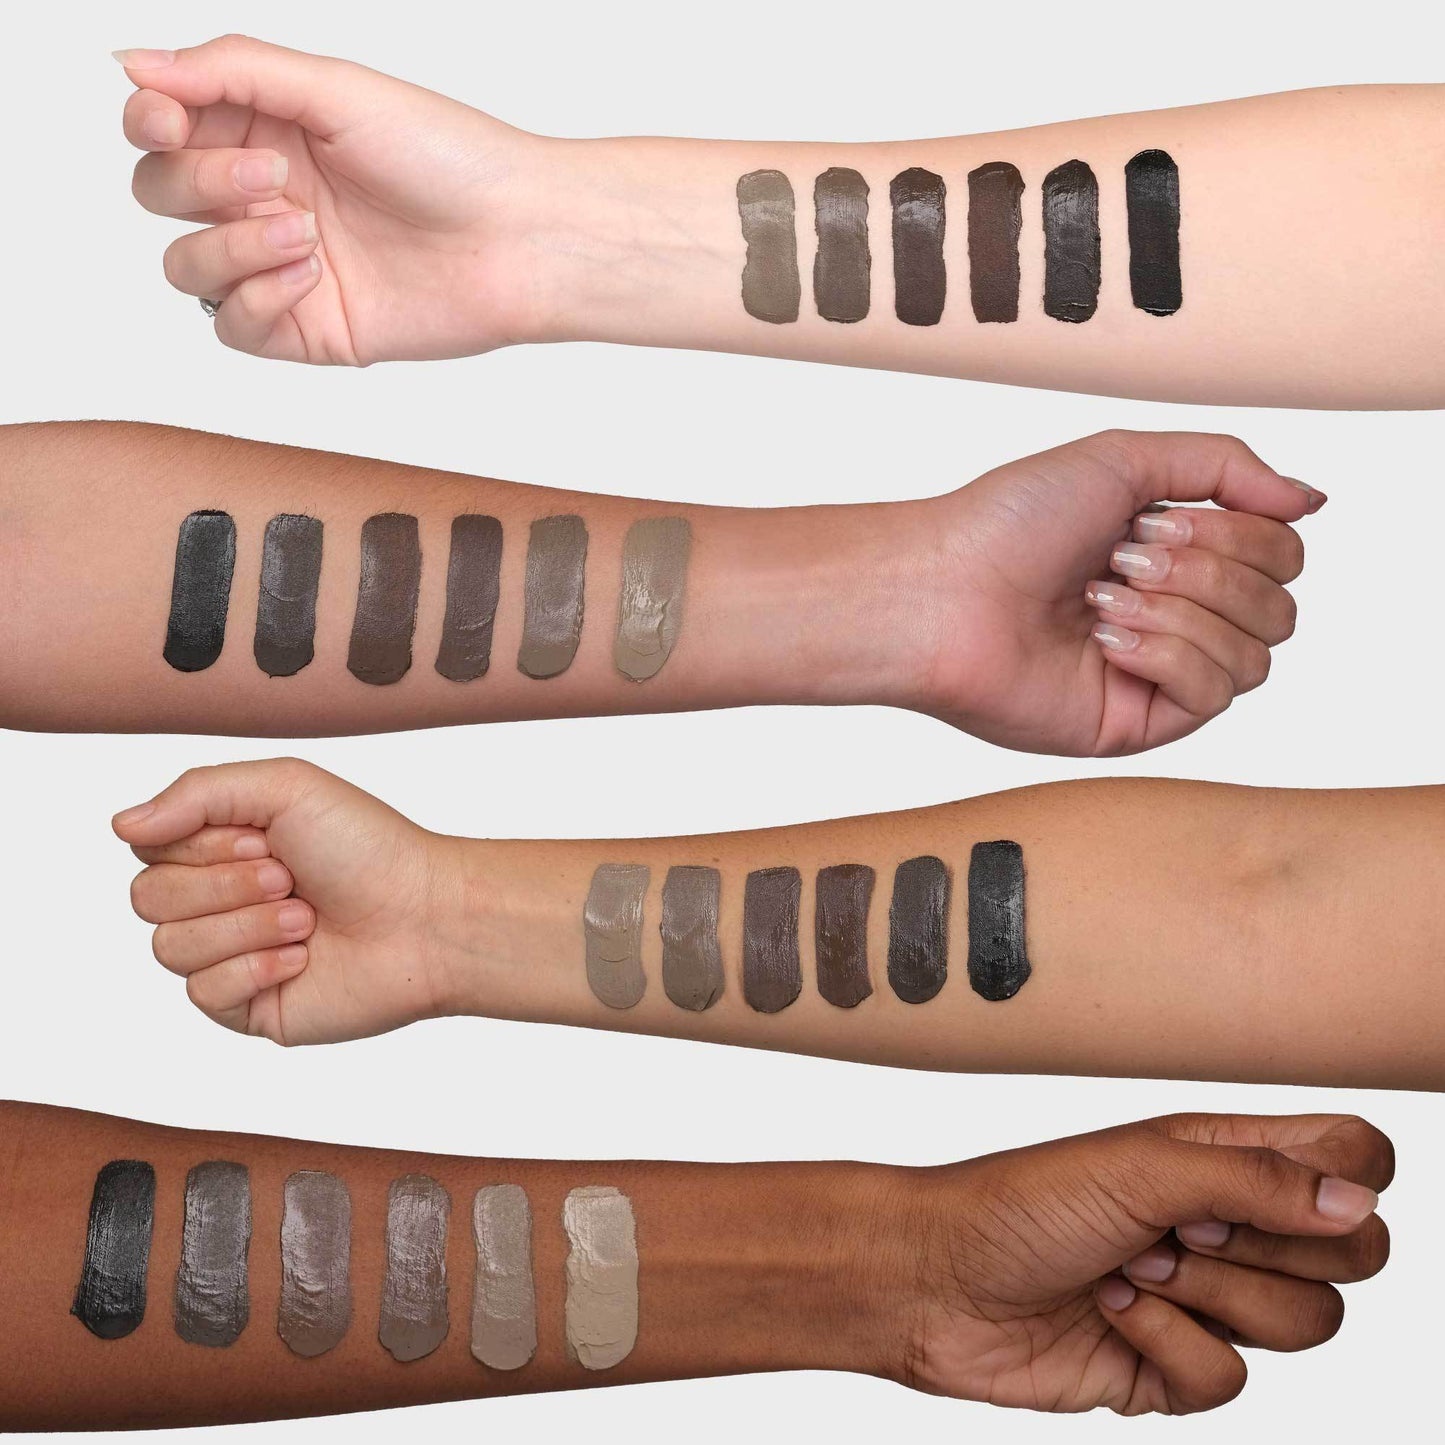 All swatches on arms of various skin types